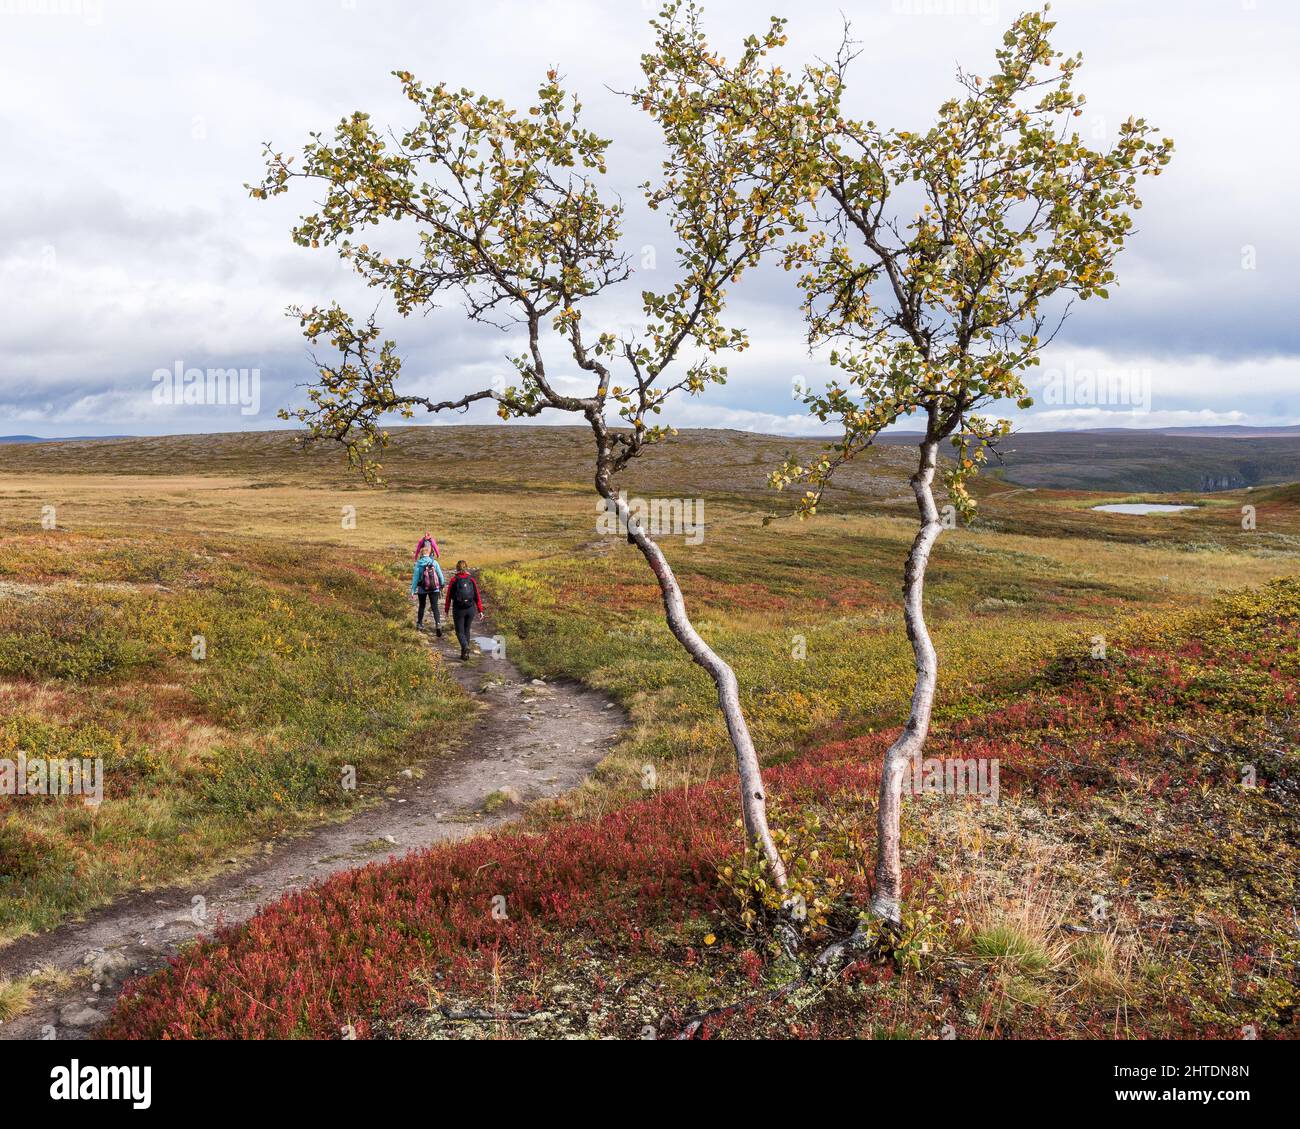 View of a green tree against people hiking with backpacks in an open field in Norway Stock Photo